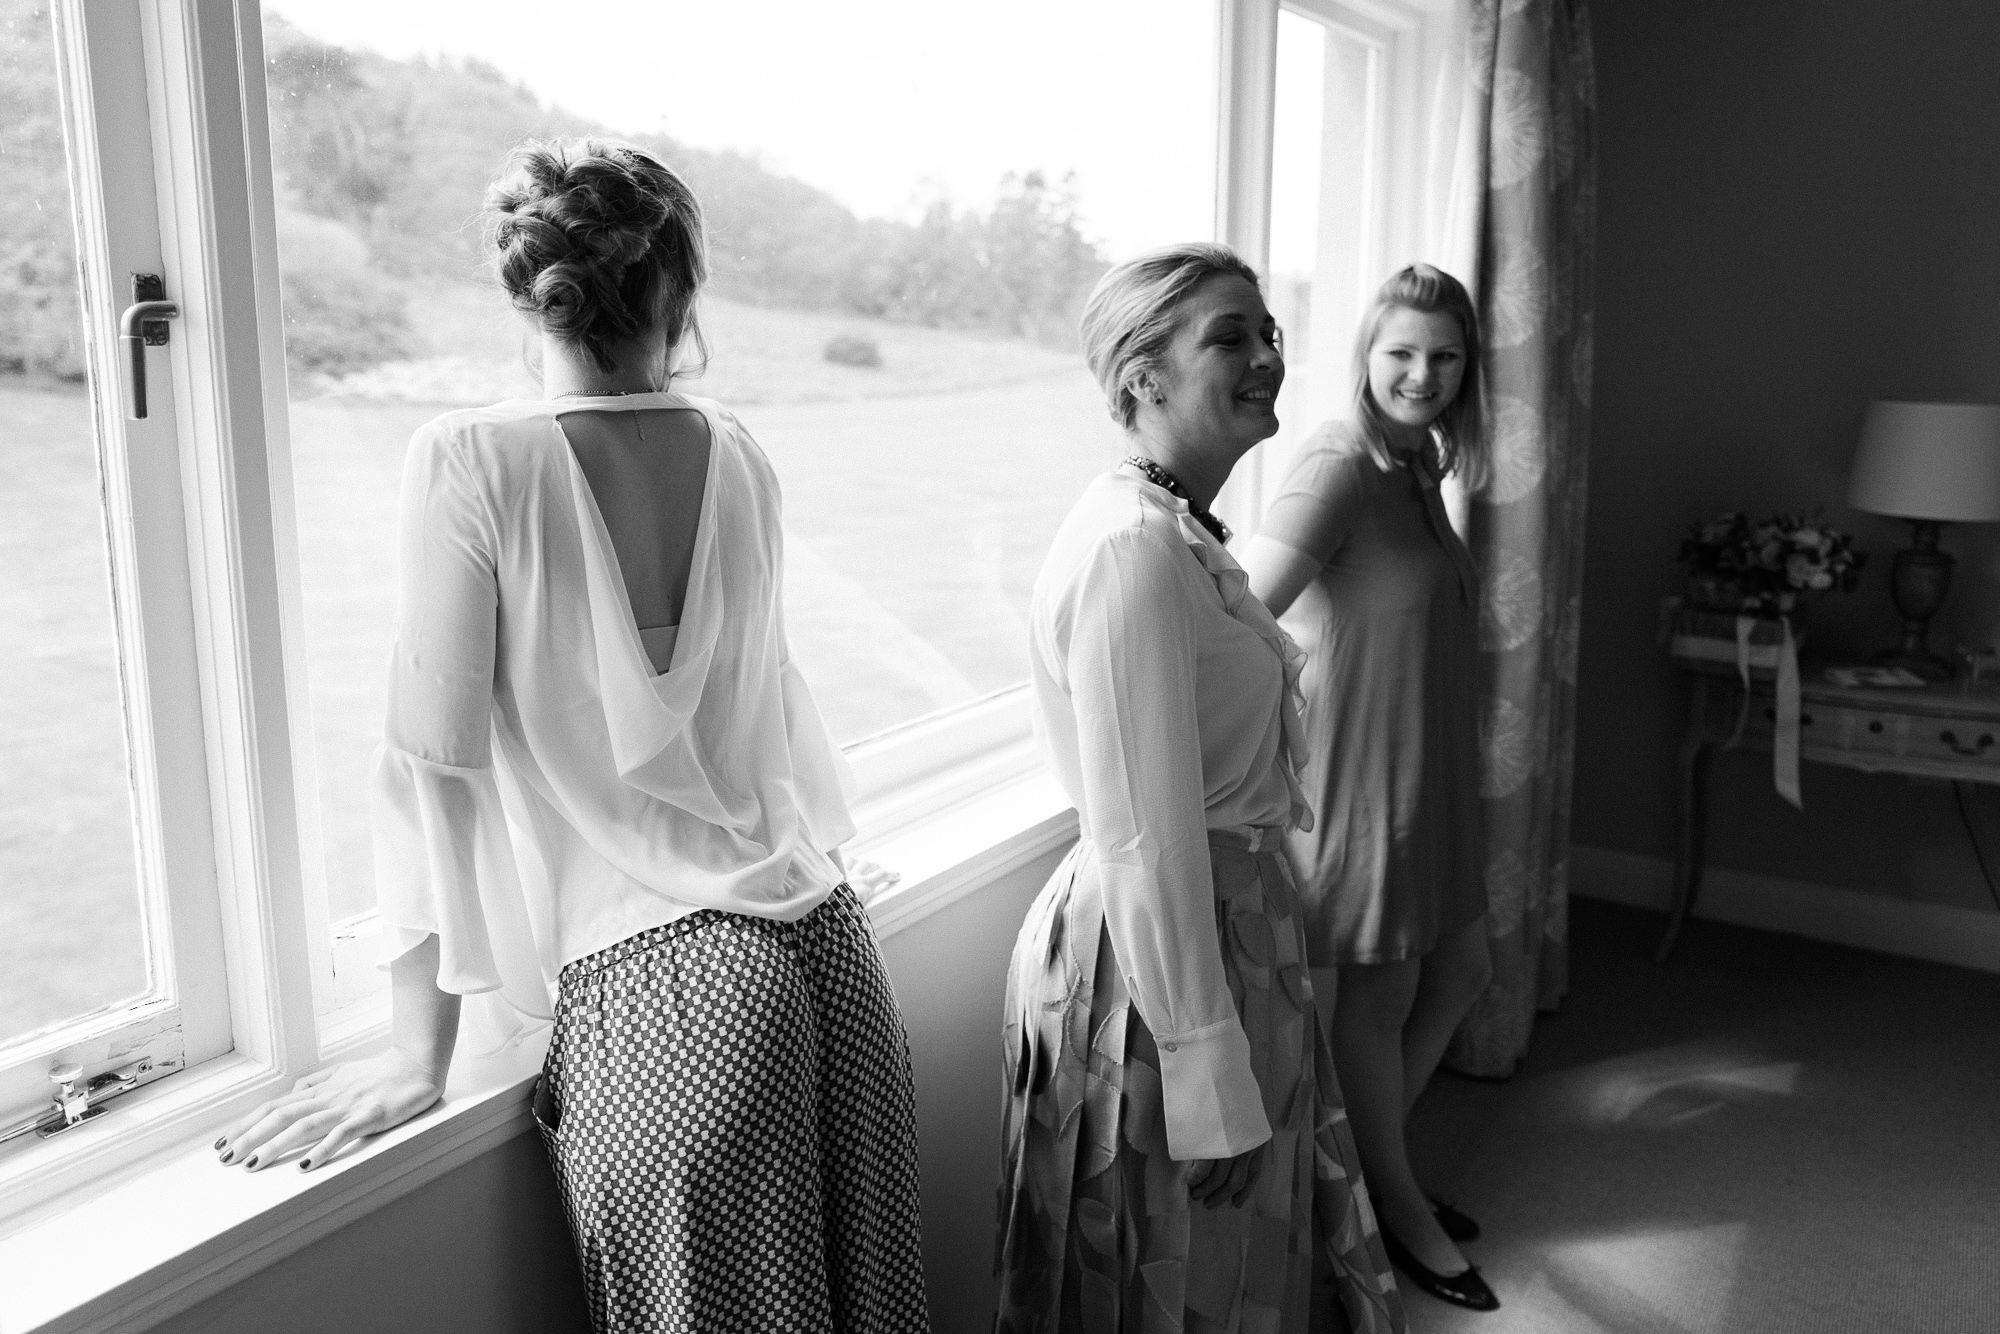 Bridal party during preparations